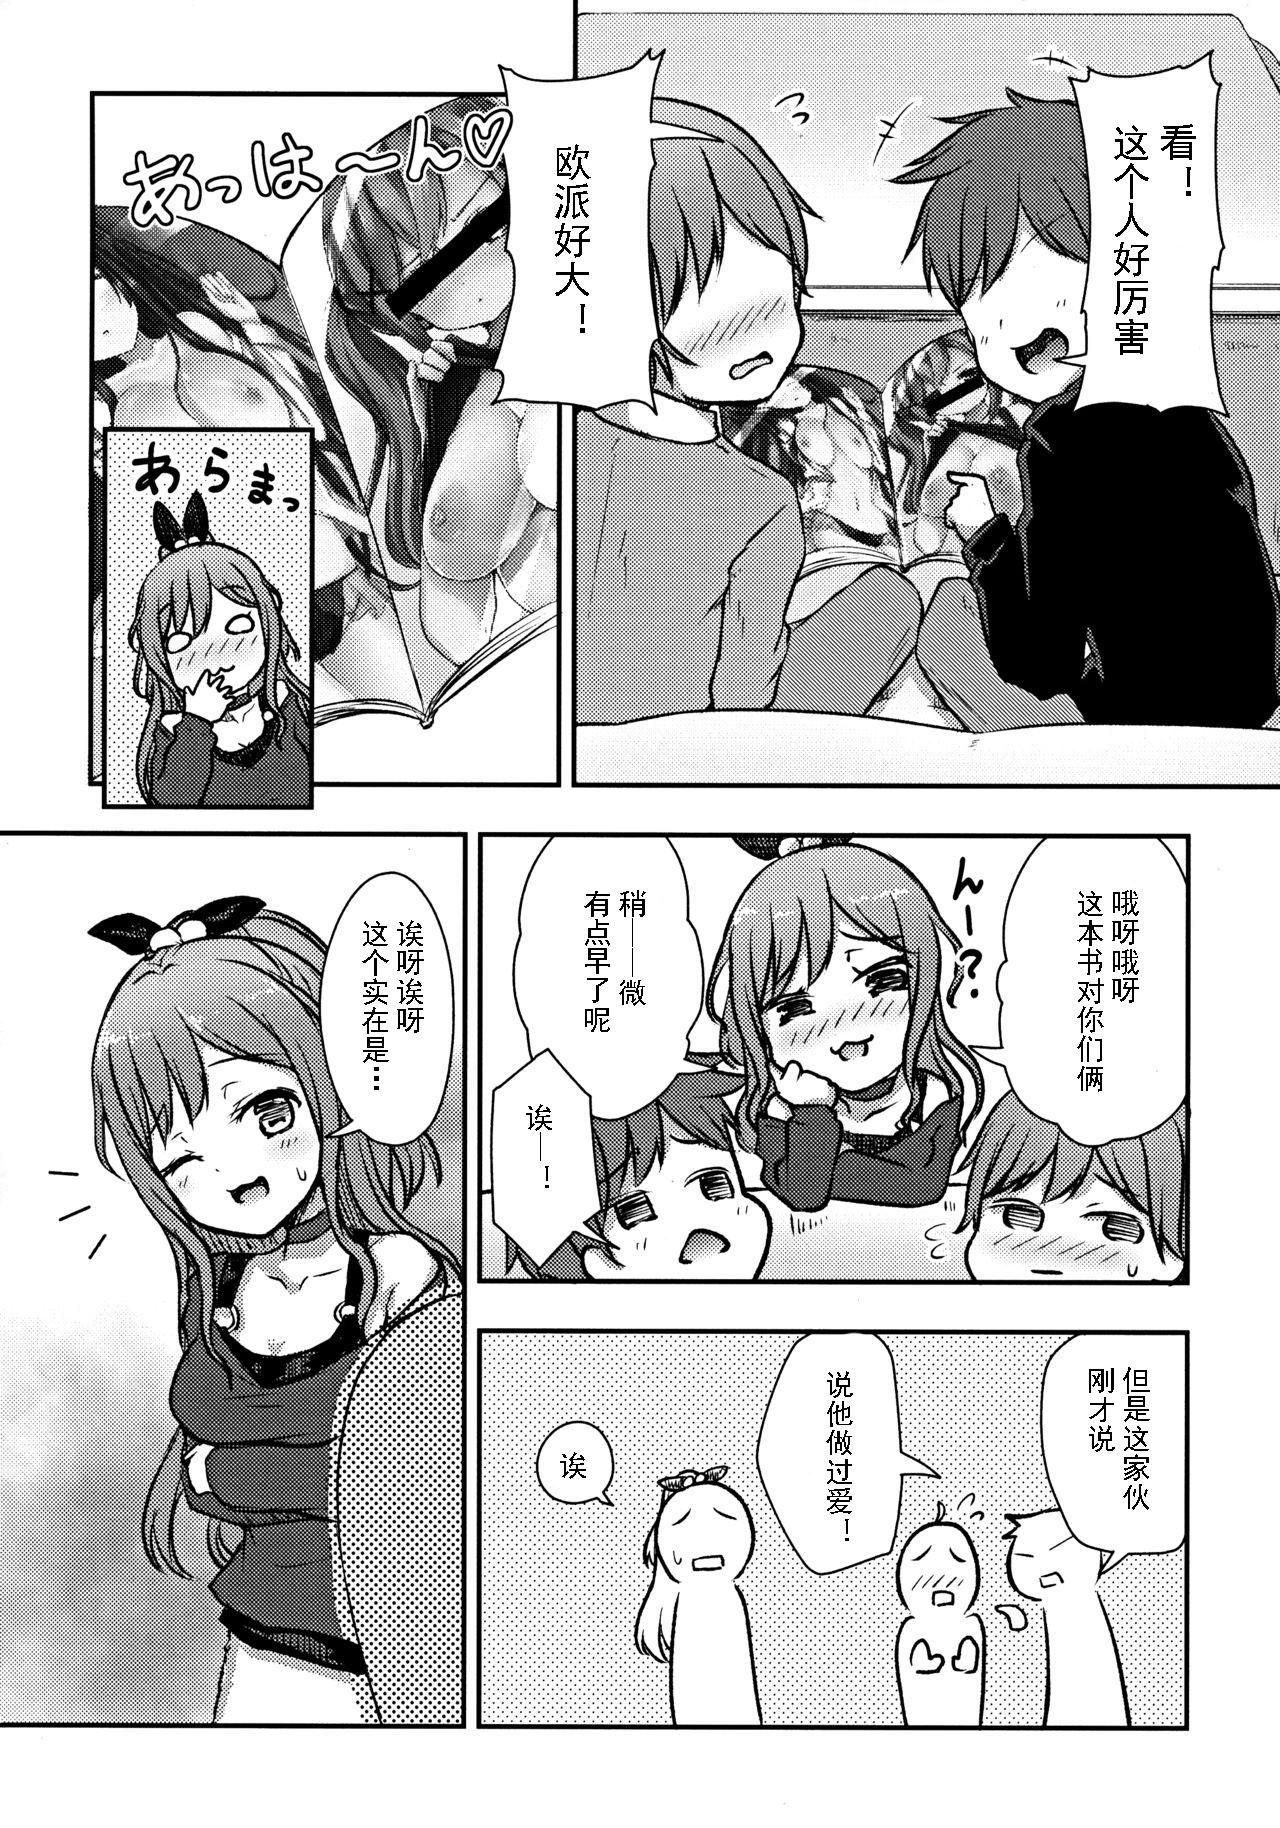 Bubblebutt Hearty Hybrid Household - Bang dream Old And Young - Page 3